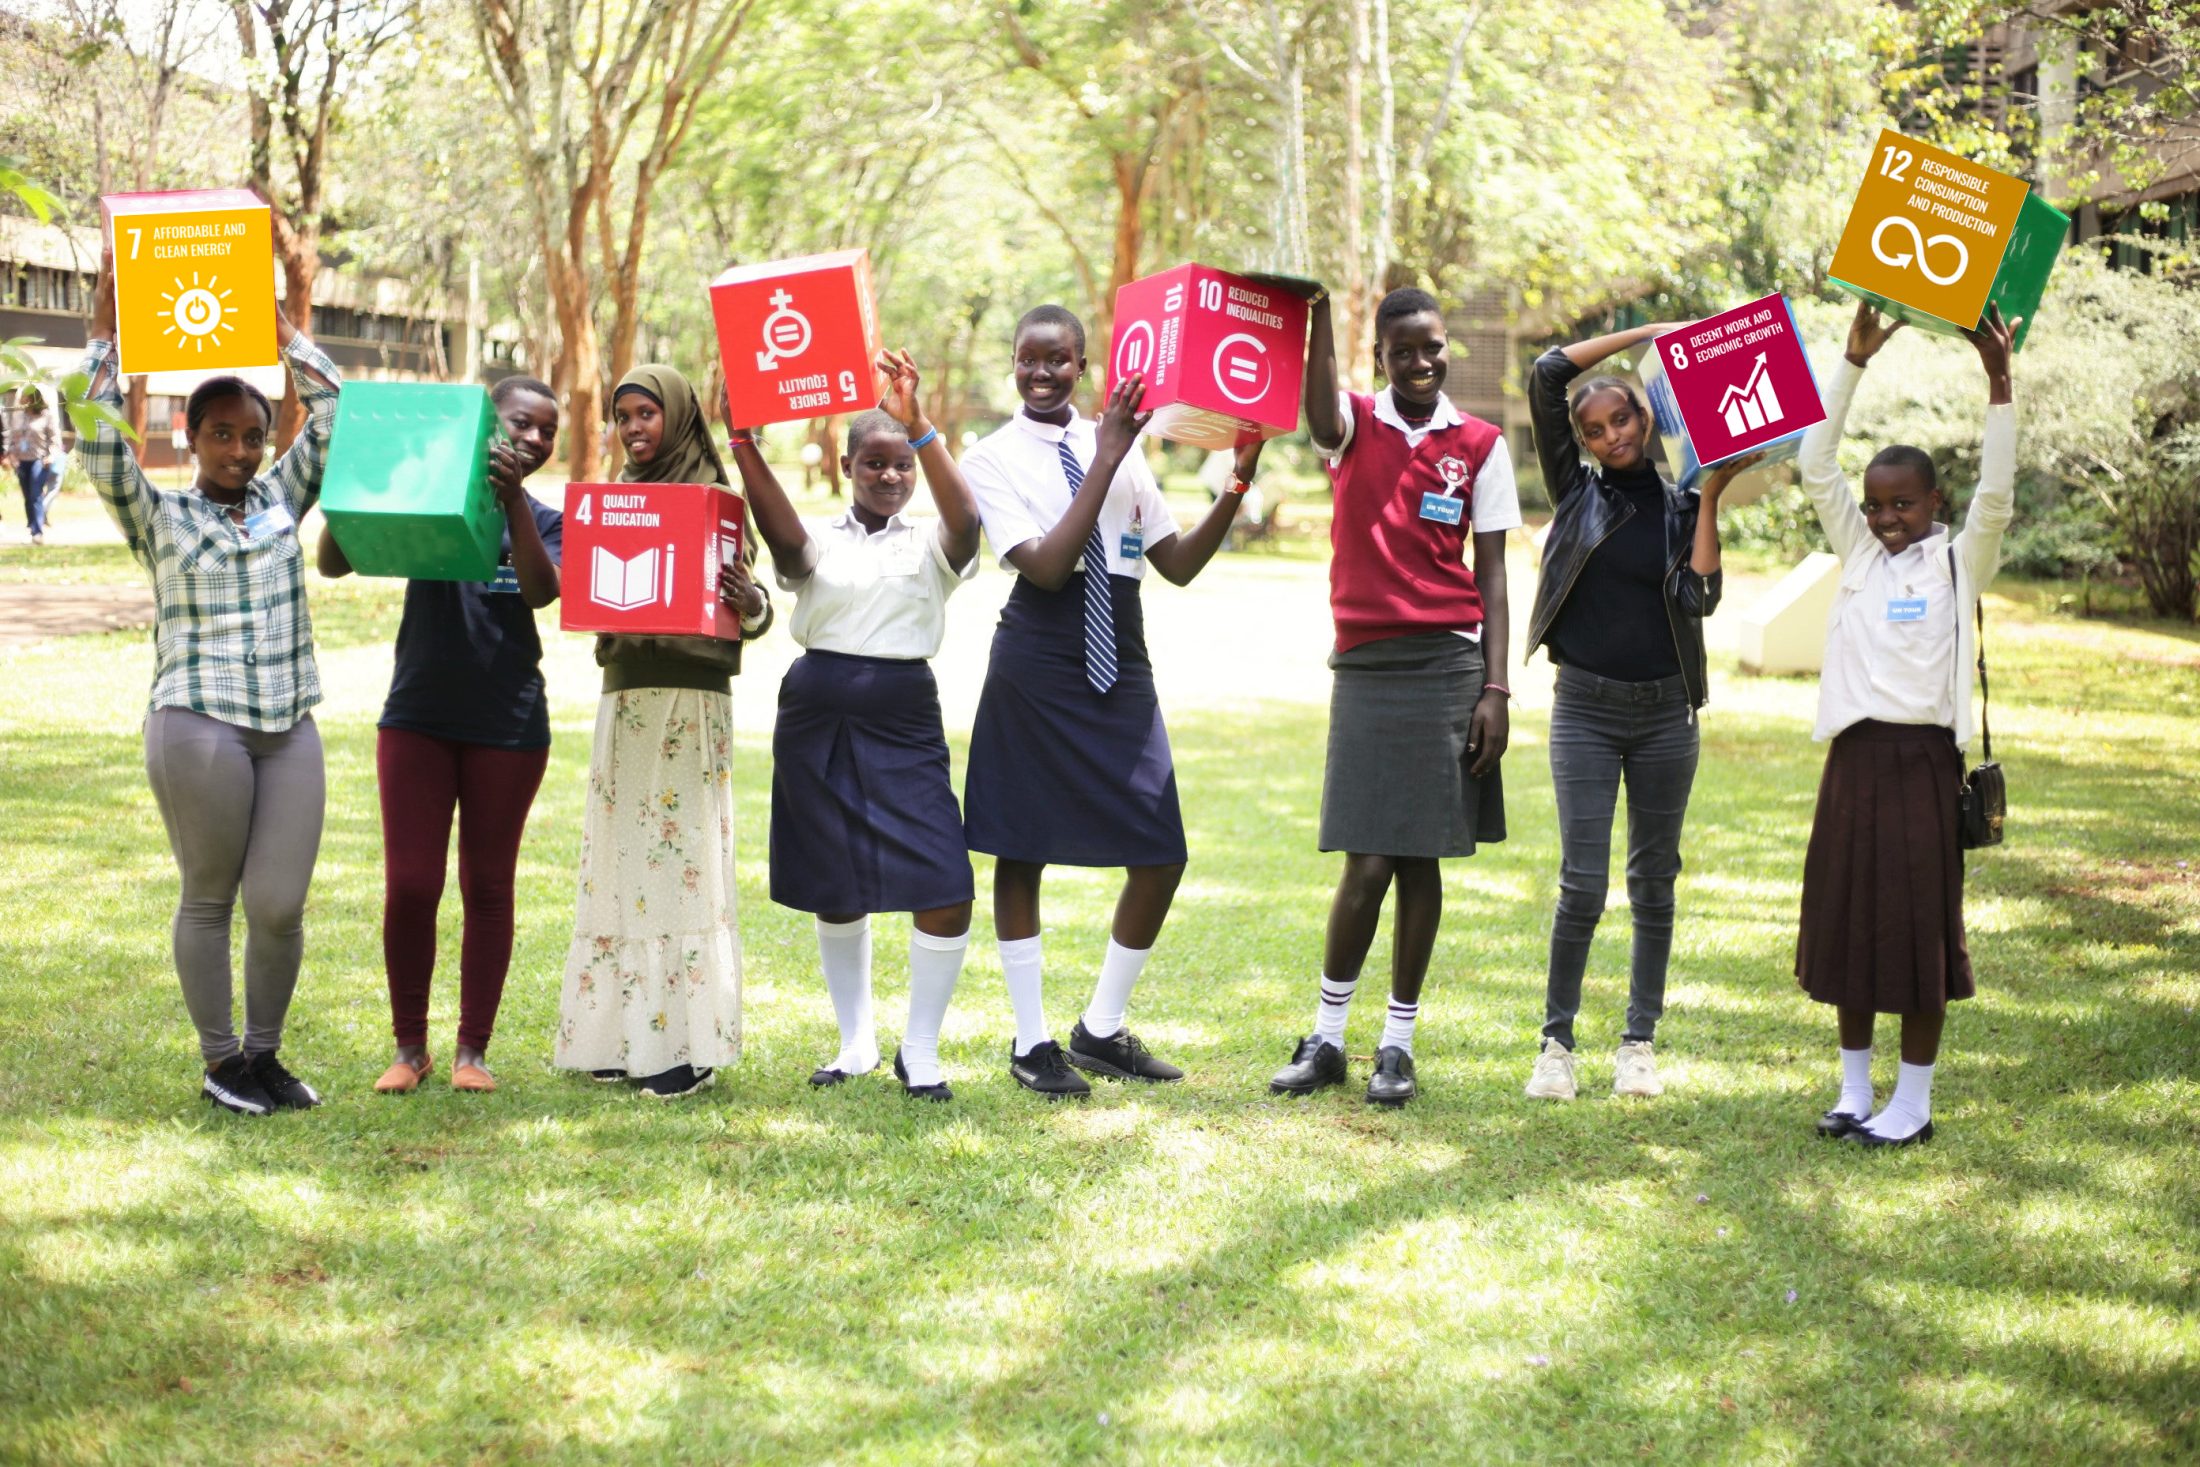 8 girls holding up the signs with ABS Sustainable Development Goals